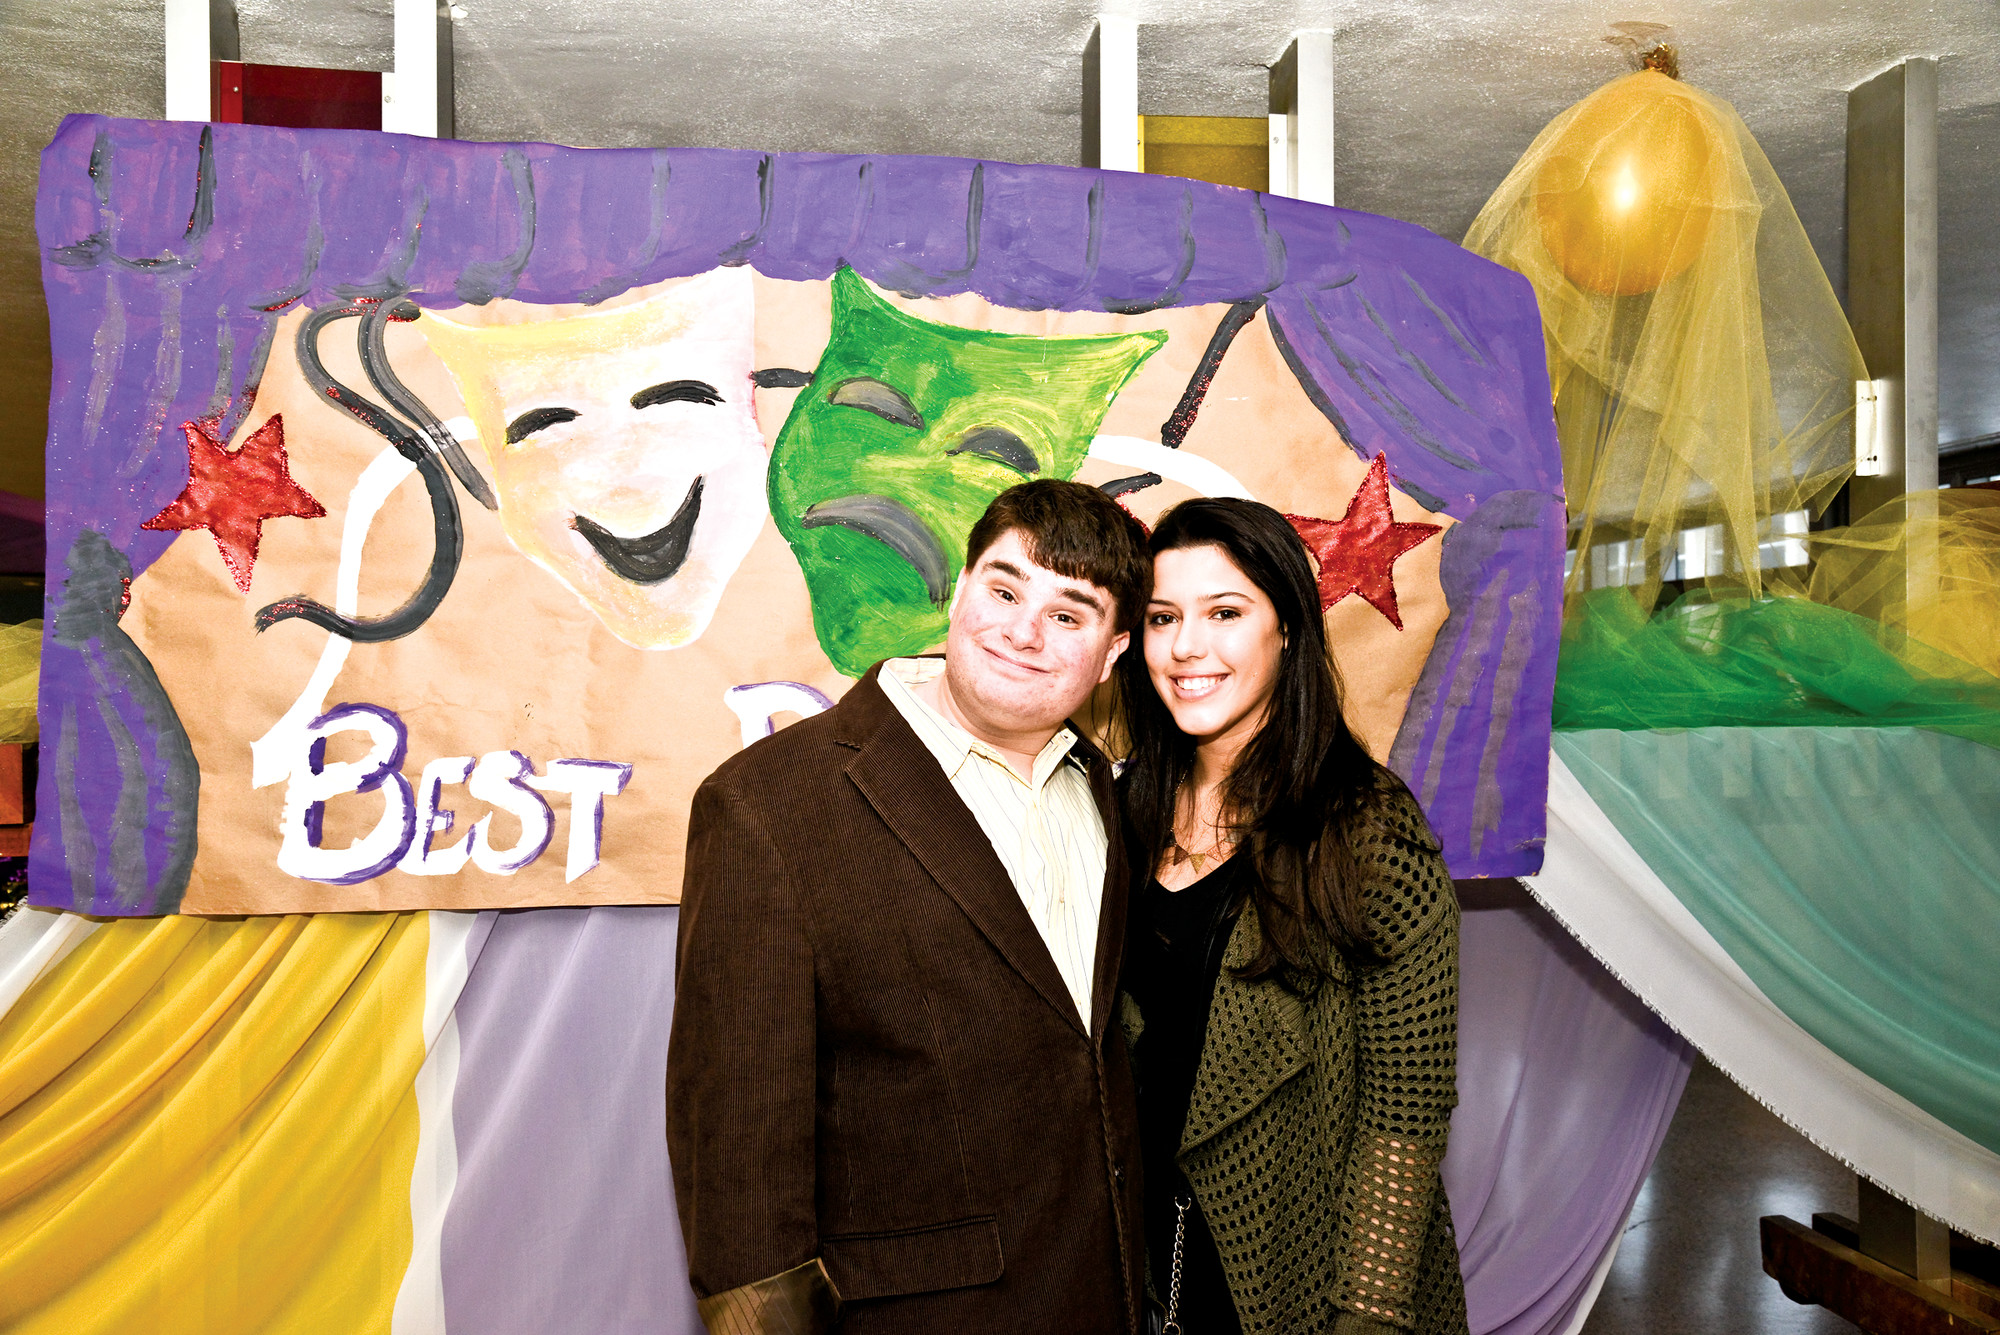 Eric Turner arrived with Danielle Finnerty to the Best Buddies Prom.